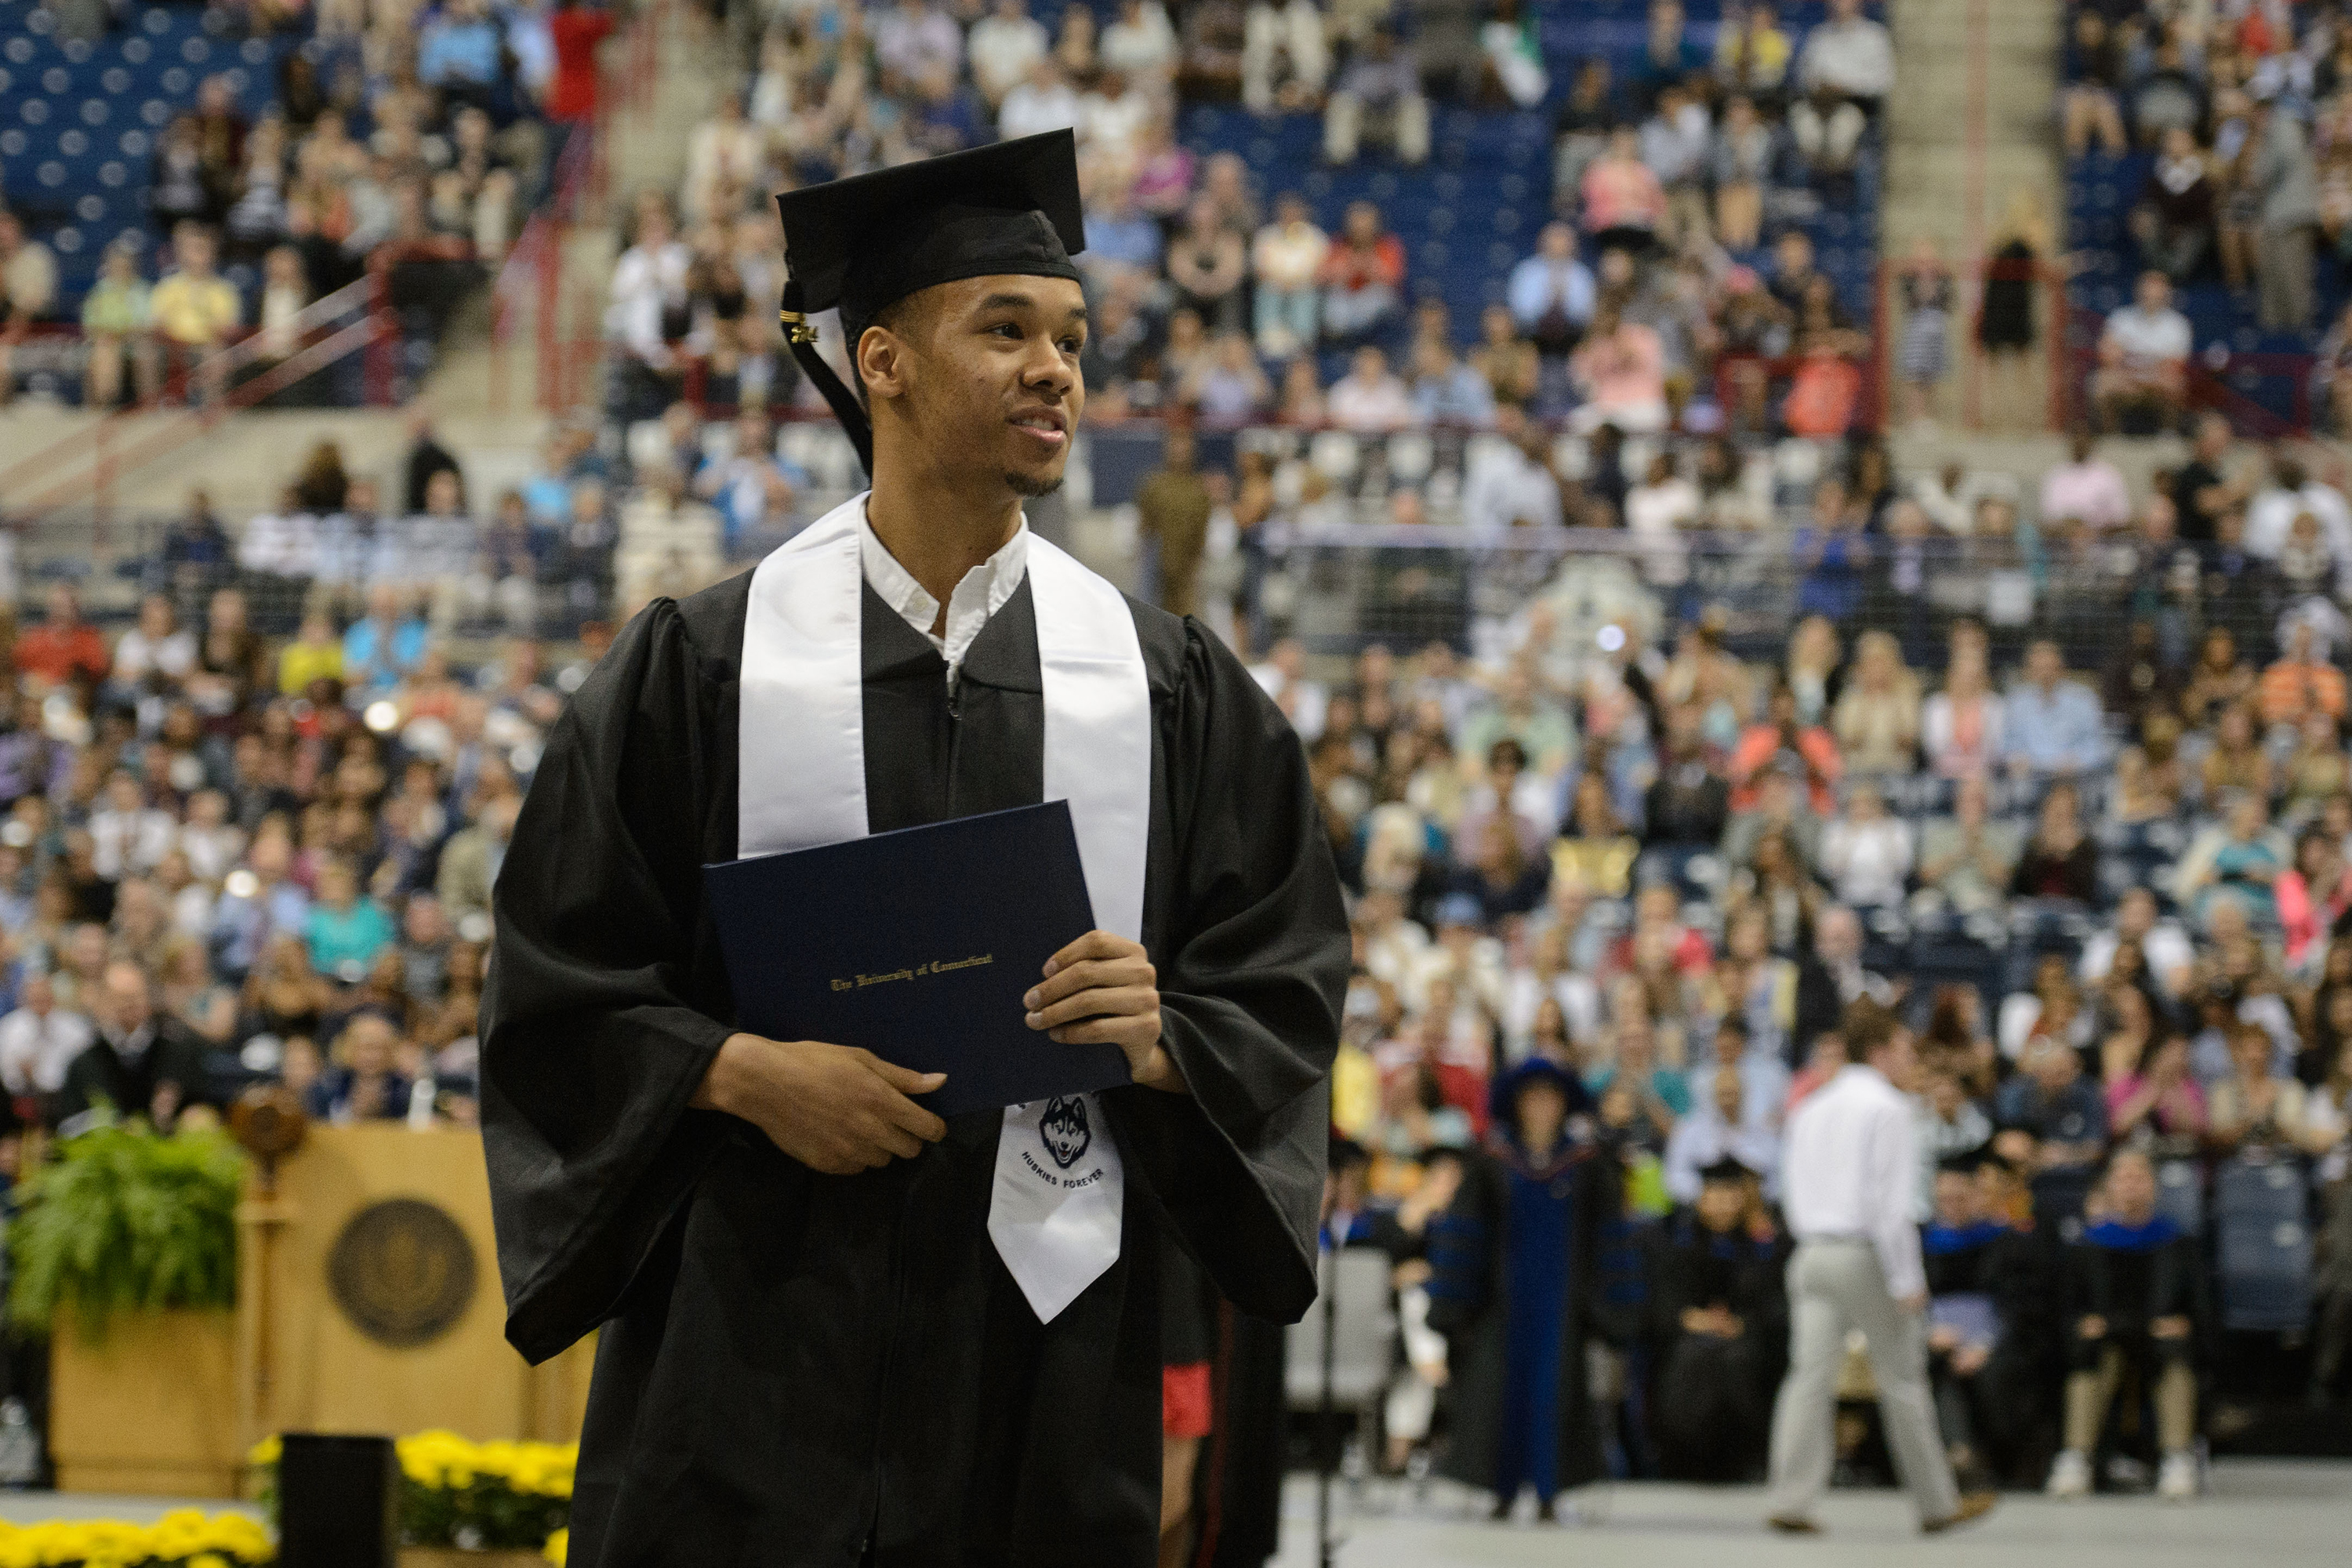 Shabazz Napier '14 (CLAS) walks across the floor at Gampel Pavilion after receiving his diploma case during the midday College of Liberal Arts and Sciences commencement ceremony on May 11, 2014. (Peter Morenus/UConn Photo)